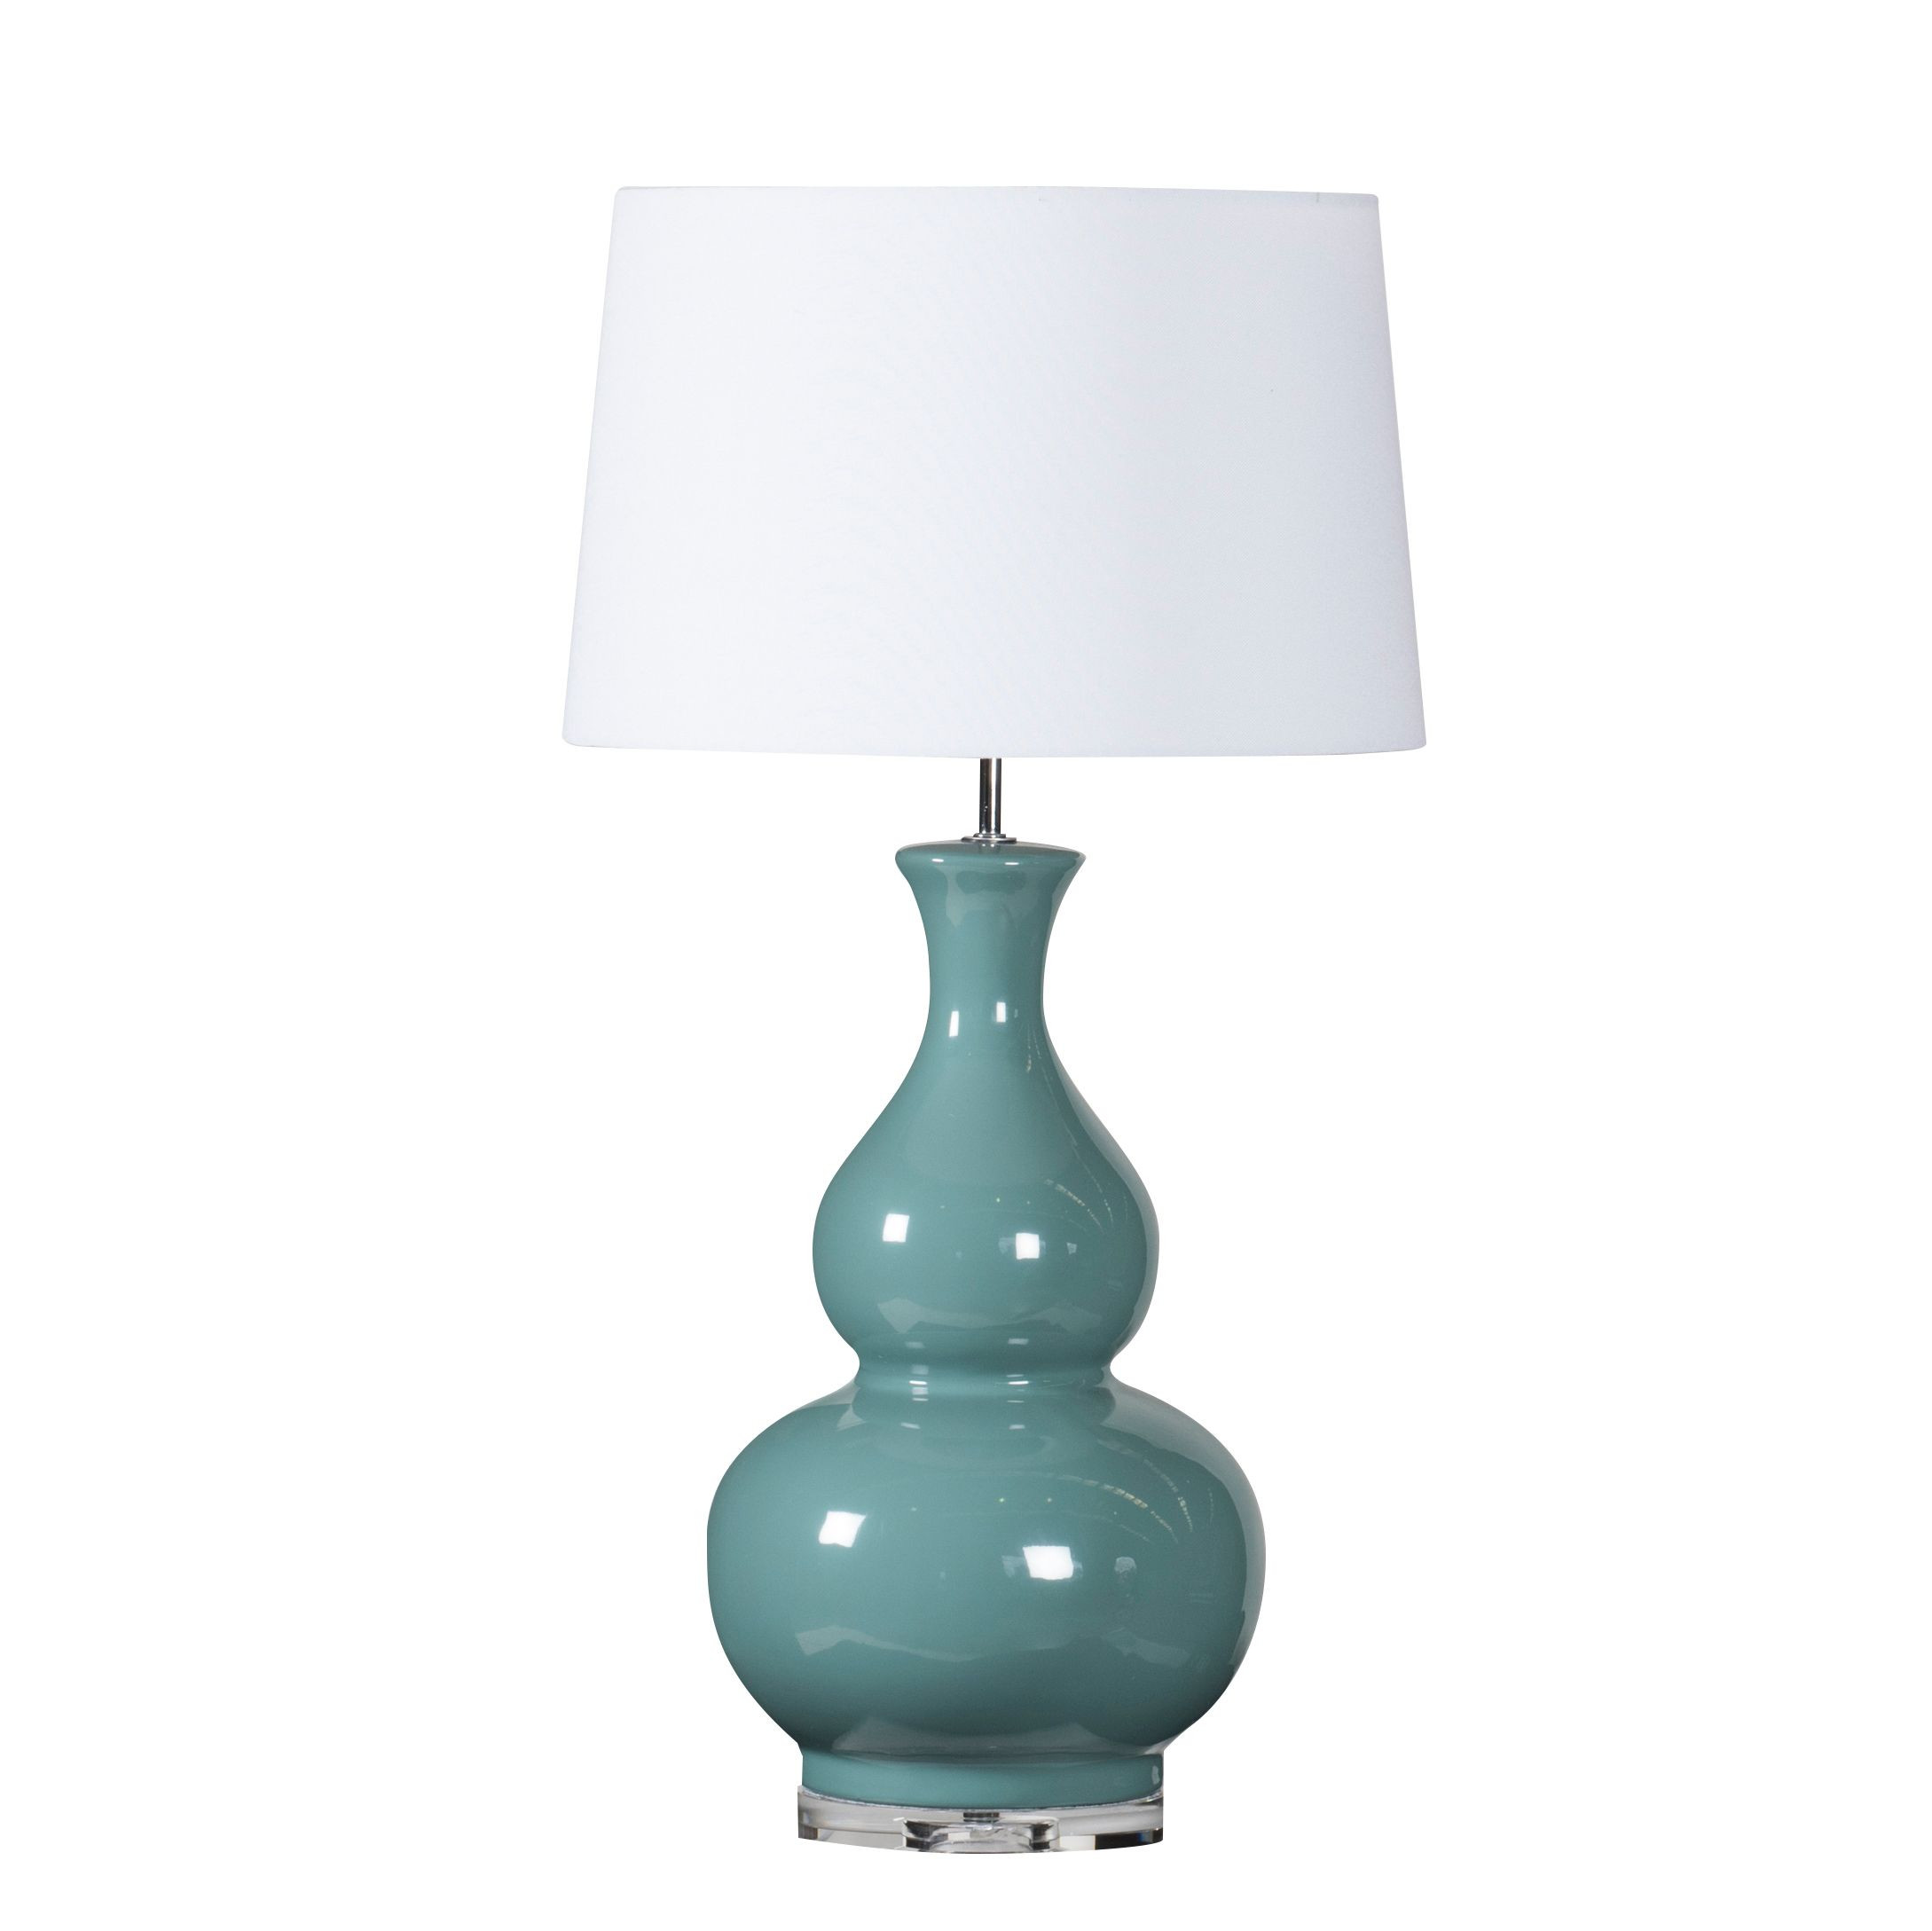 12 Unique Chinese Vase Table Lamps 2024 free download chinese vase table lamps of pin by elac2bcbieta on lighting pinterest auras and lights intended for shop a unique stylish range of table bedside lamps at interiors online